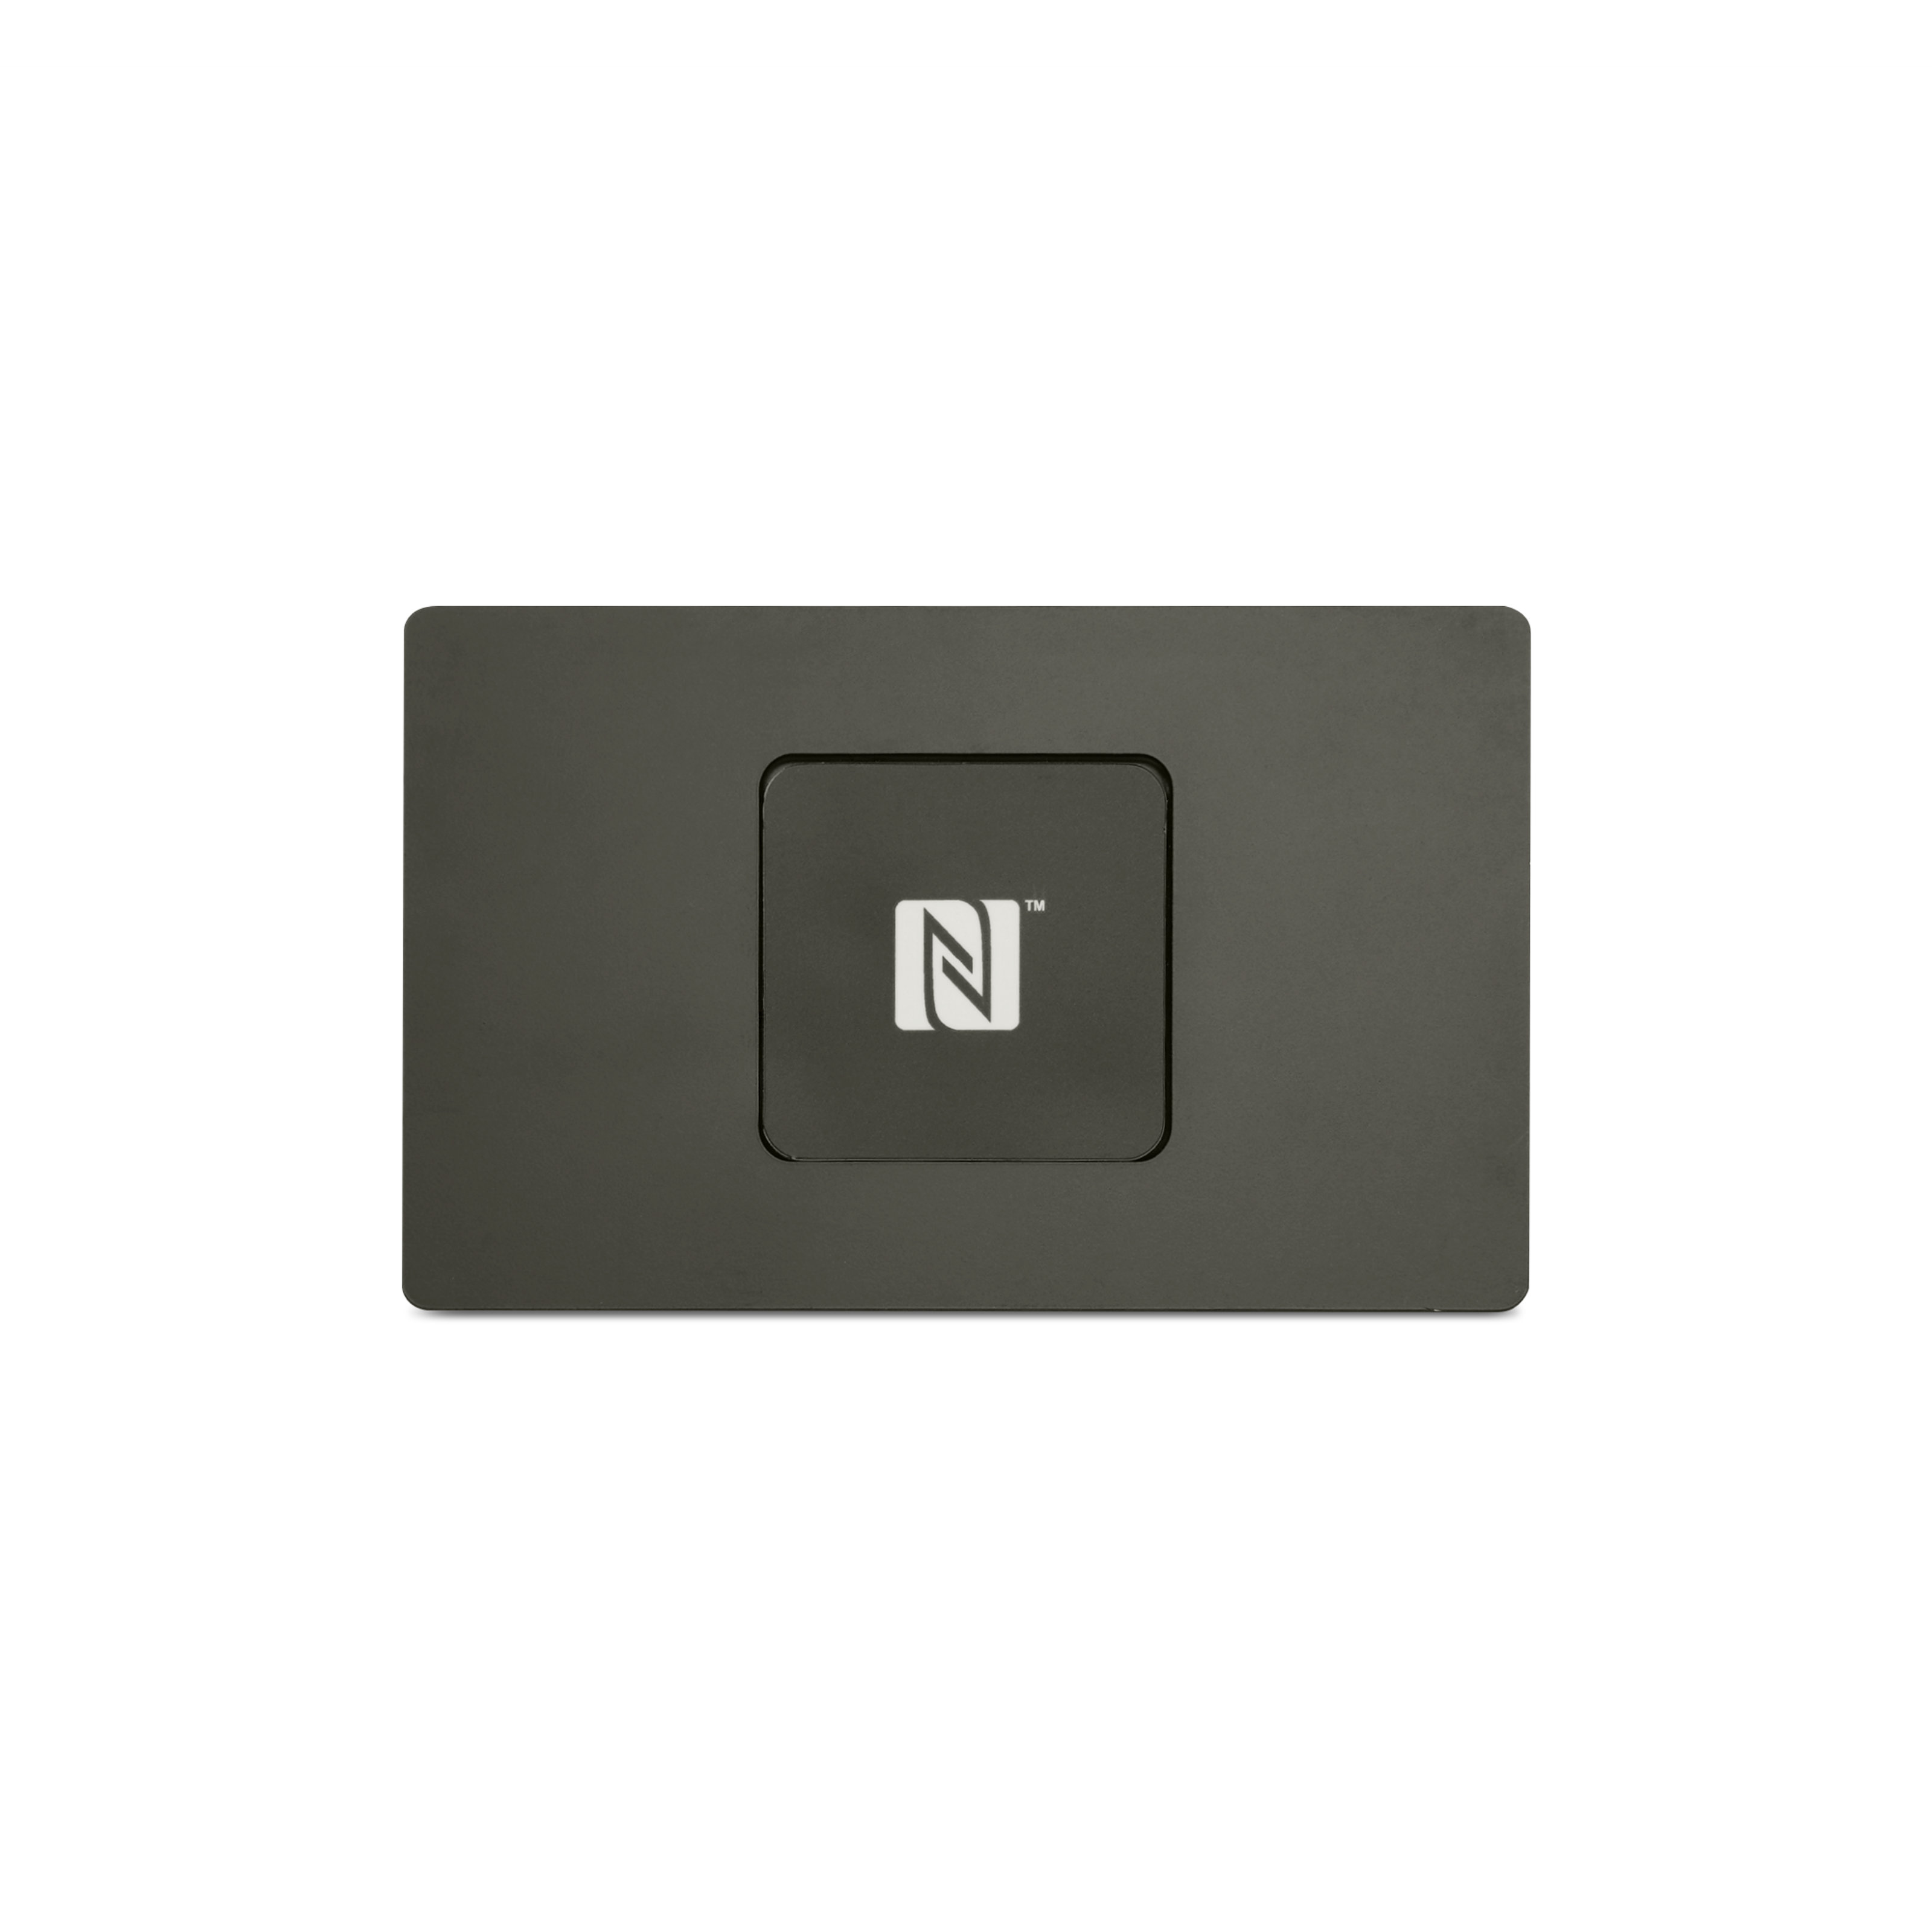 NFC-vCard - Digital business card - incl. NFC-vCard access - metal - 85 x 54 mm - black with engraving